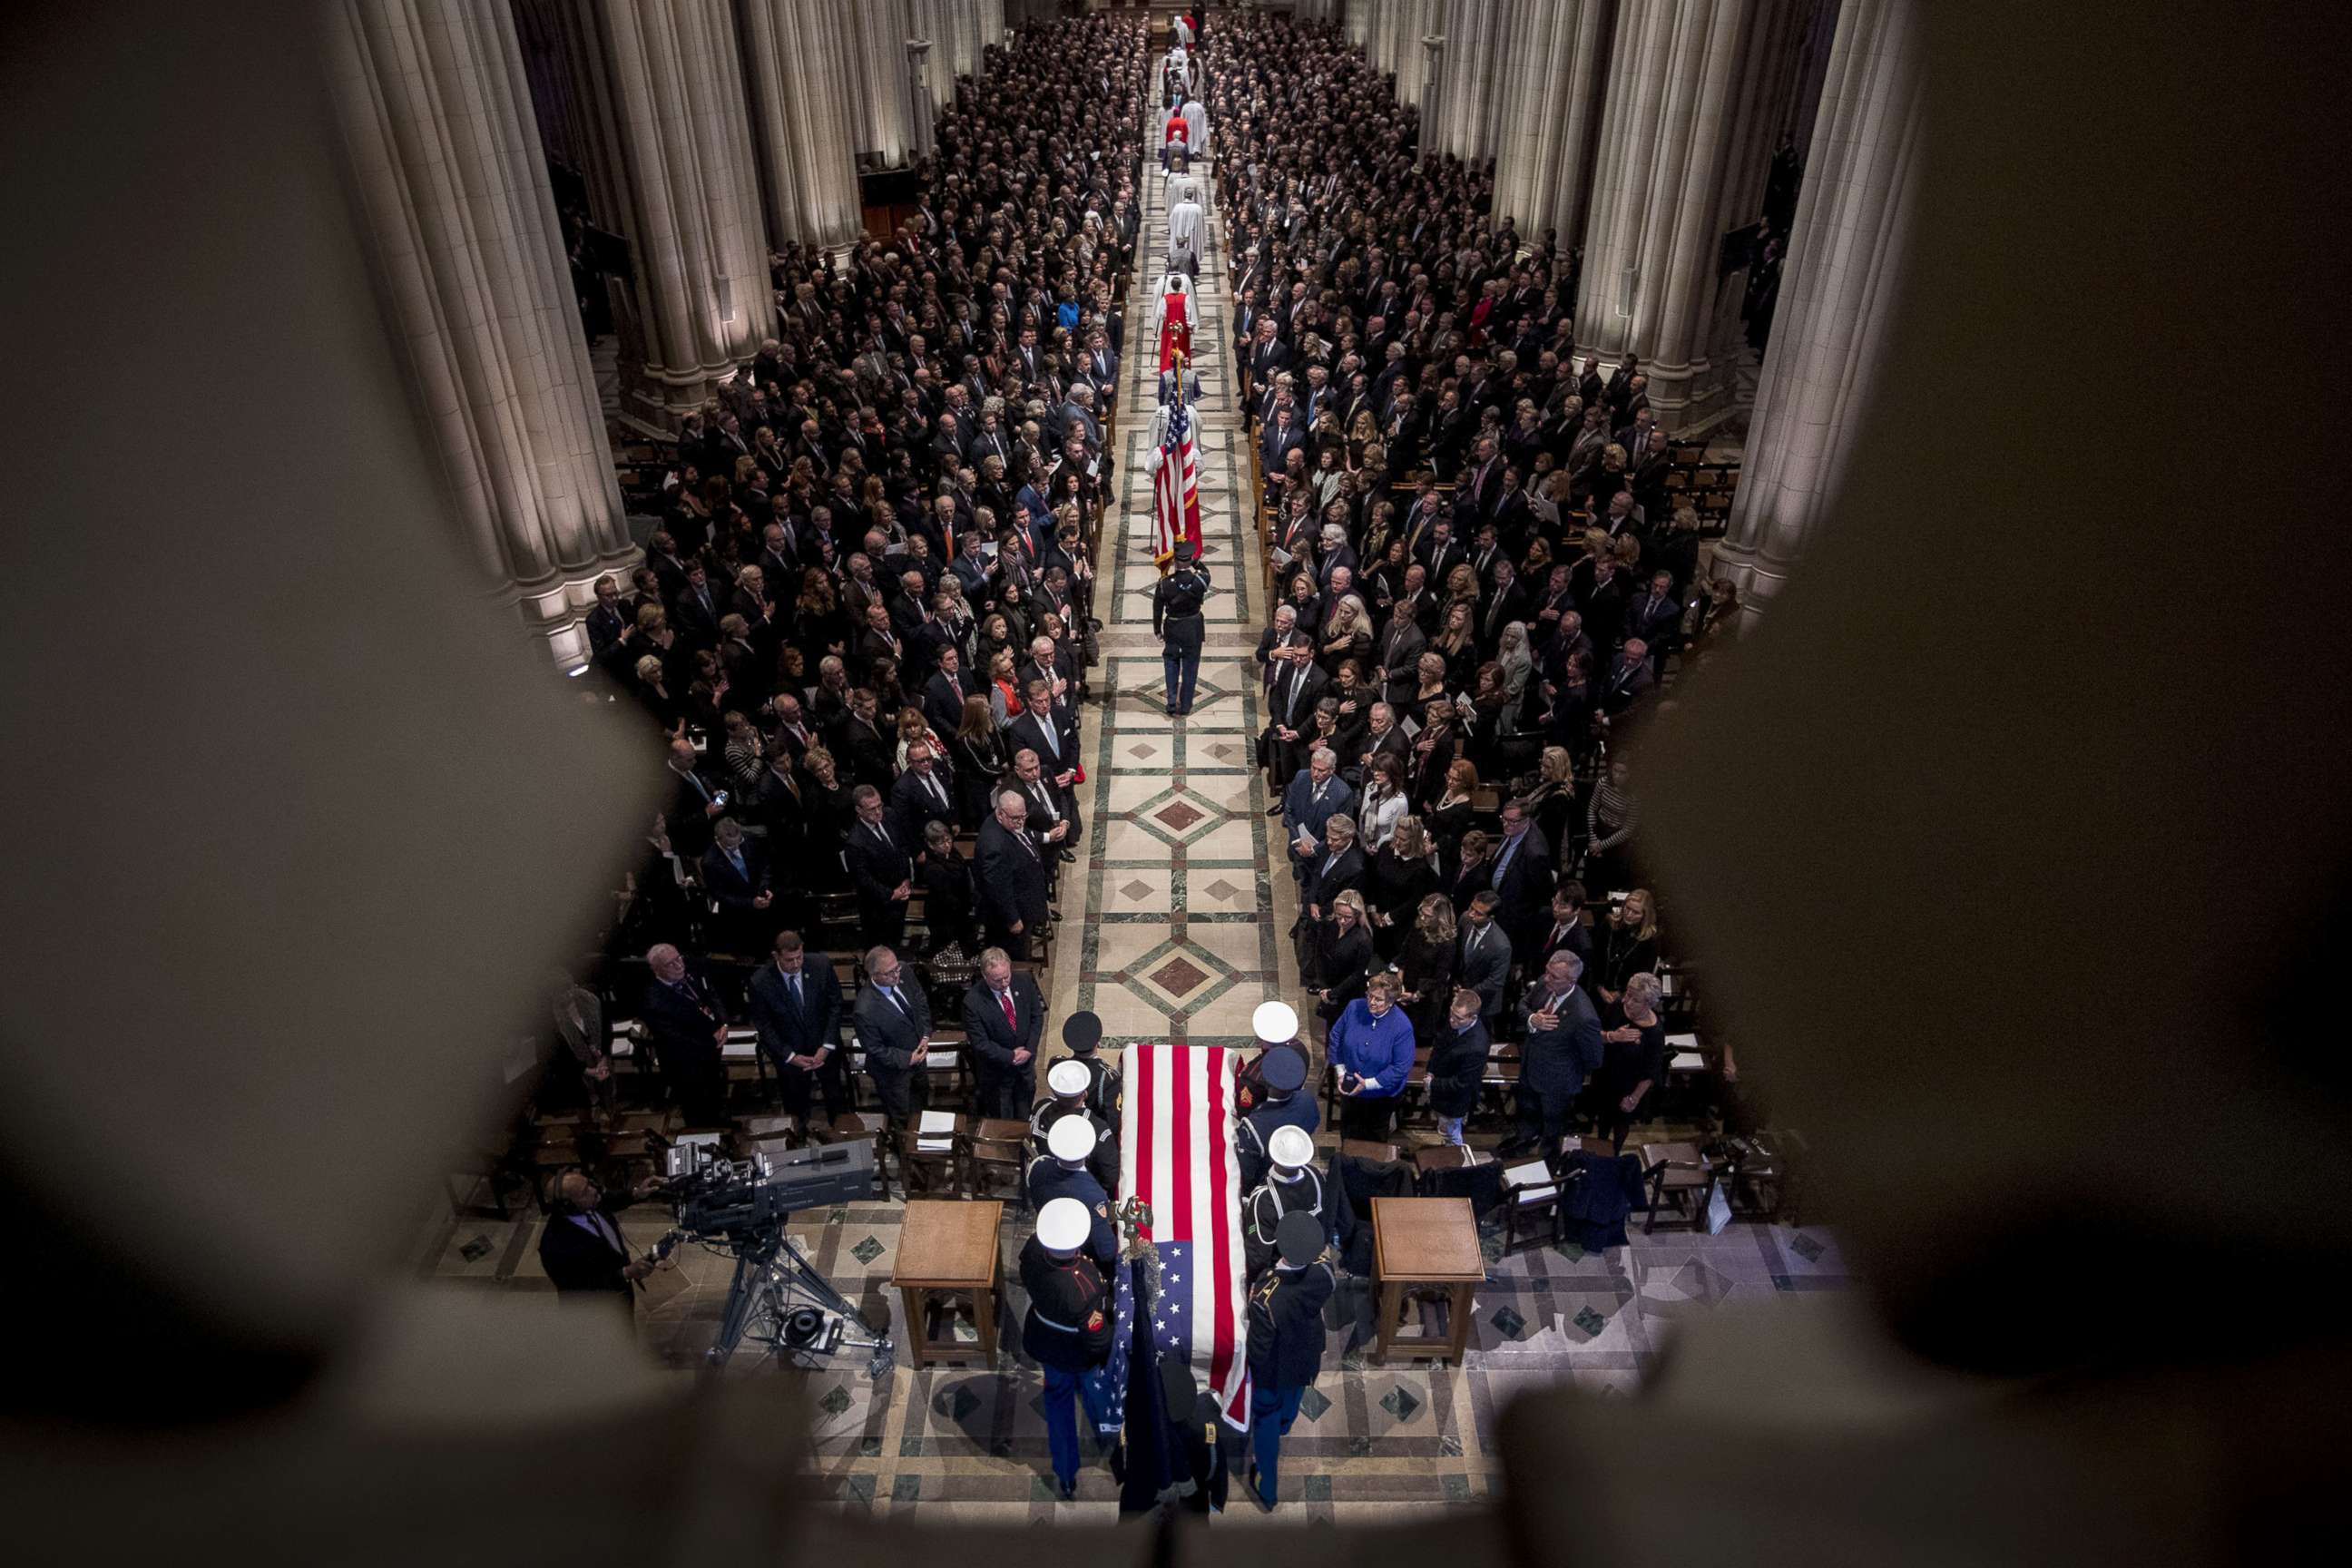 PHOTO: The flag-draped casket of former President George H.W. Bush arrives for a State Funeral at the National Cathedral, Dec. 5, 2018 in Washington, D.C.